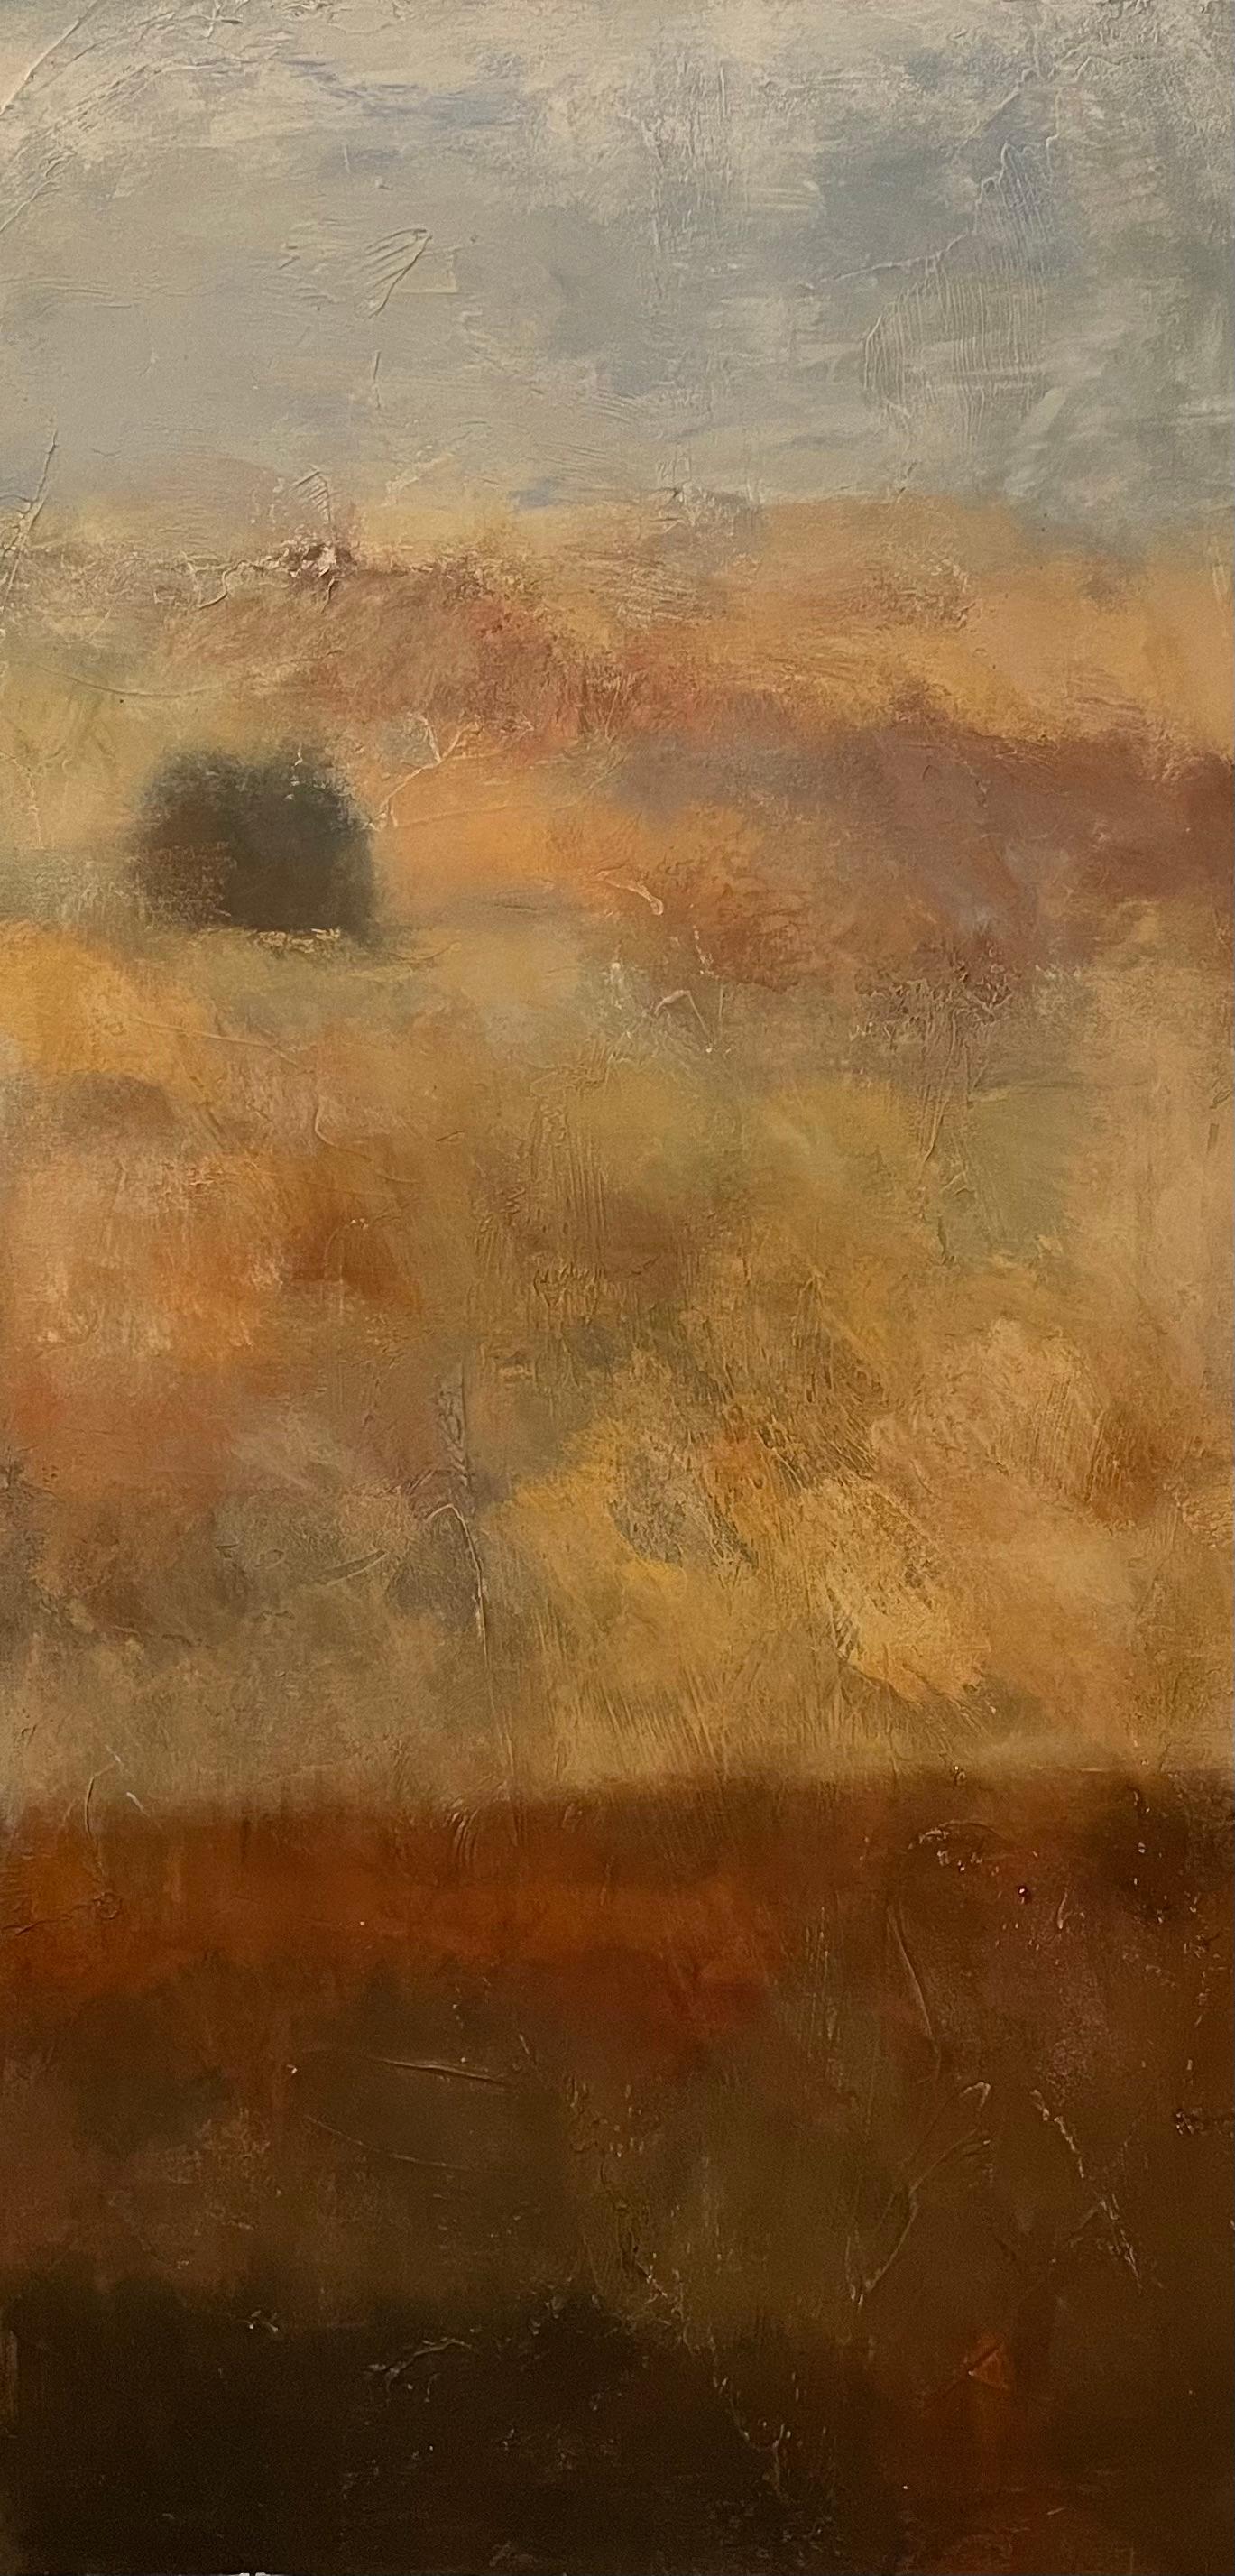 "Amber Horizon" by Helen Steele is a poignant 48" x 24" contemporary expressionist landscape that captures the viewer with its raw emotional intensity. The artwork employs a sophisticated palette of burnt sienna, umber, and muted ochres,